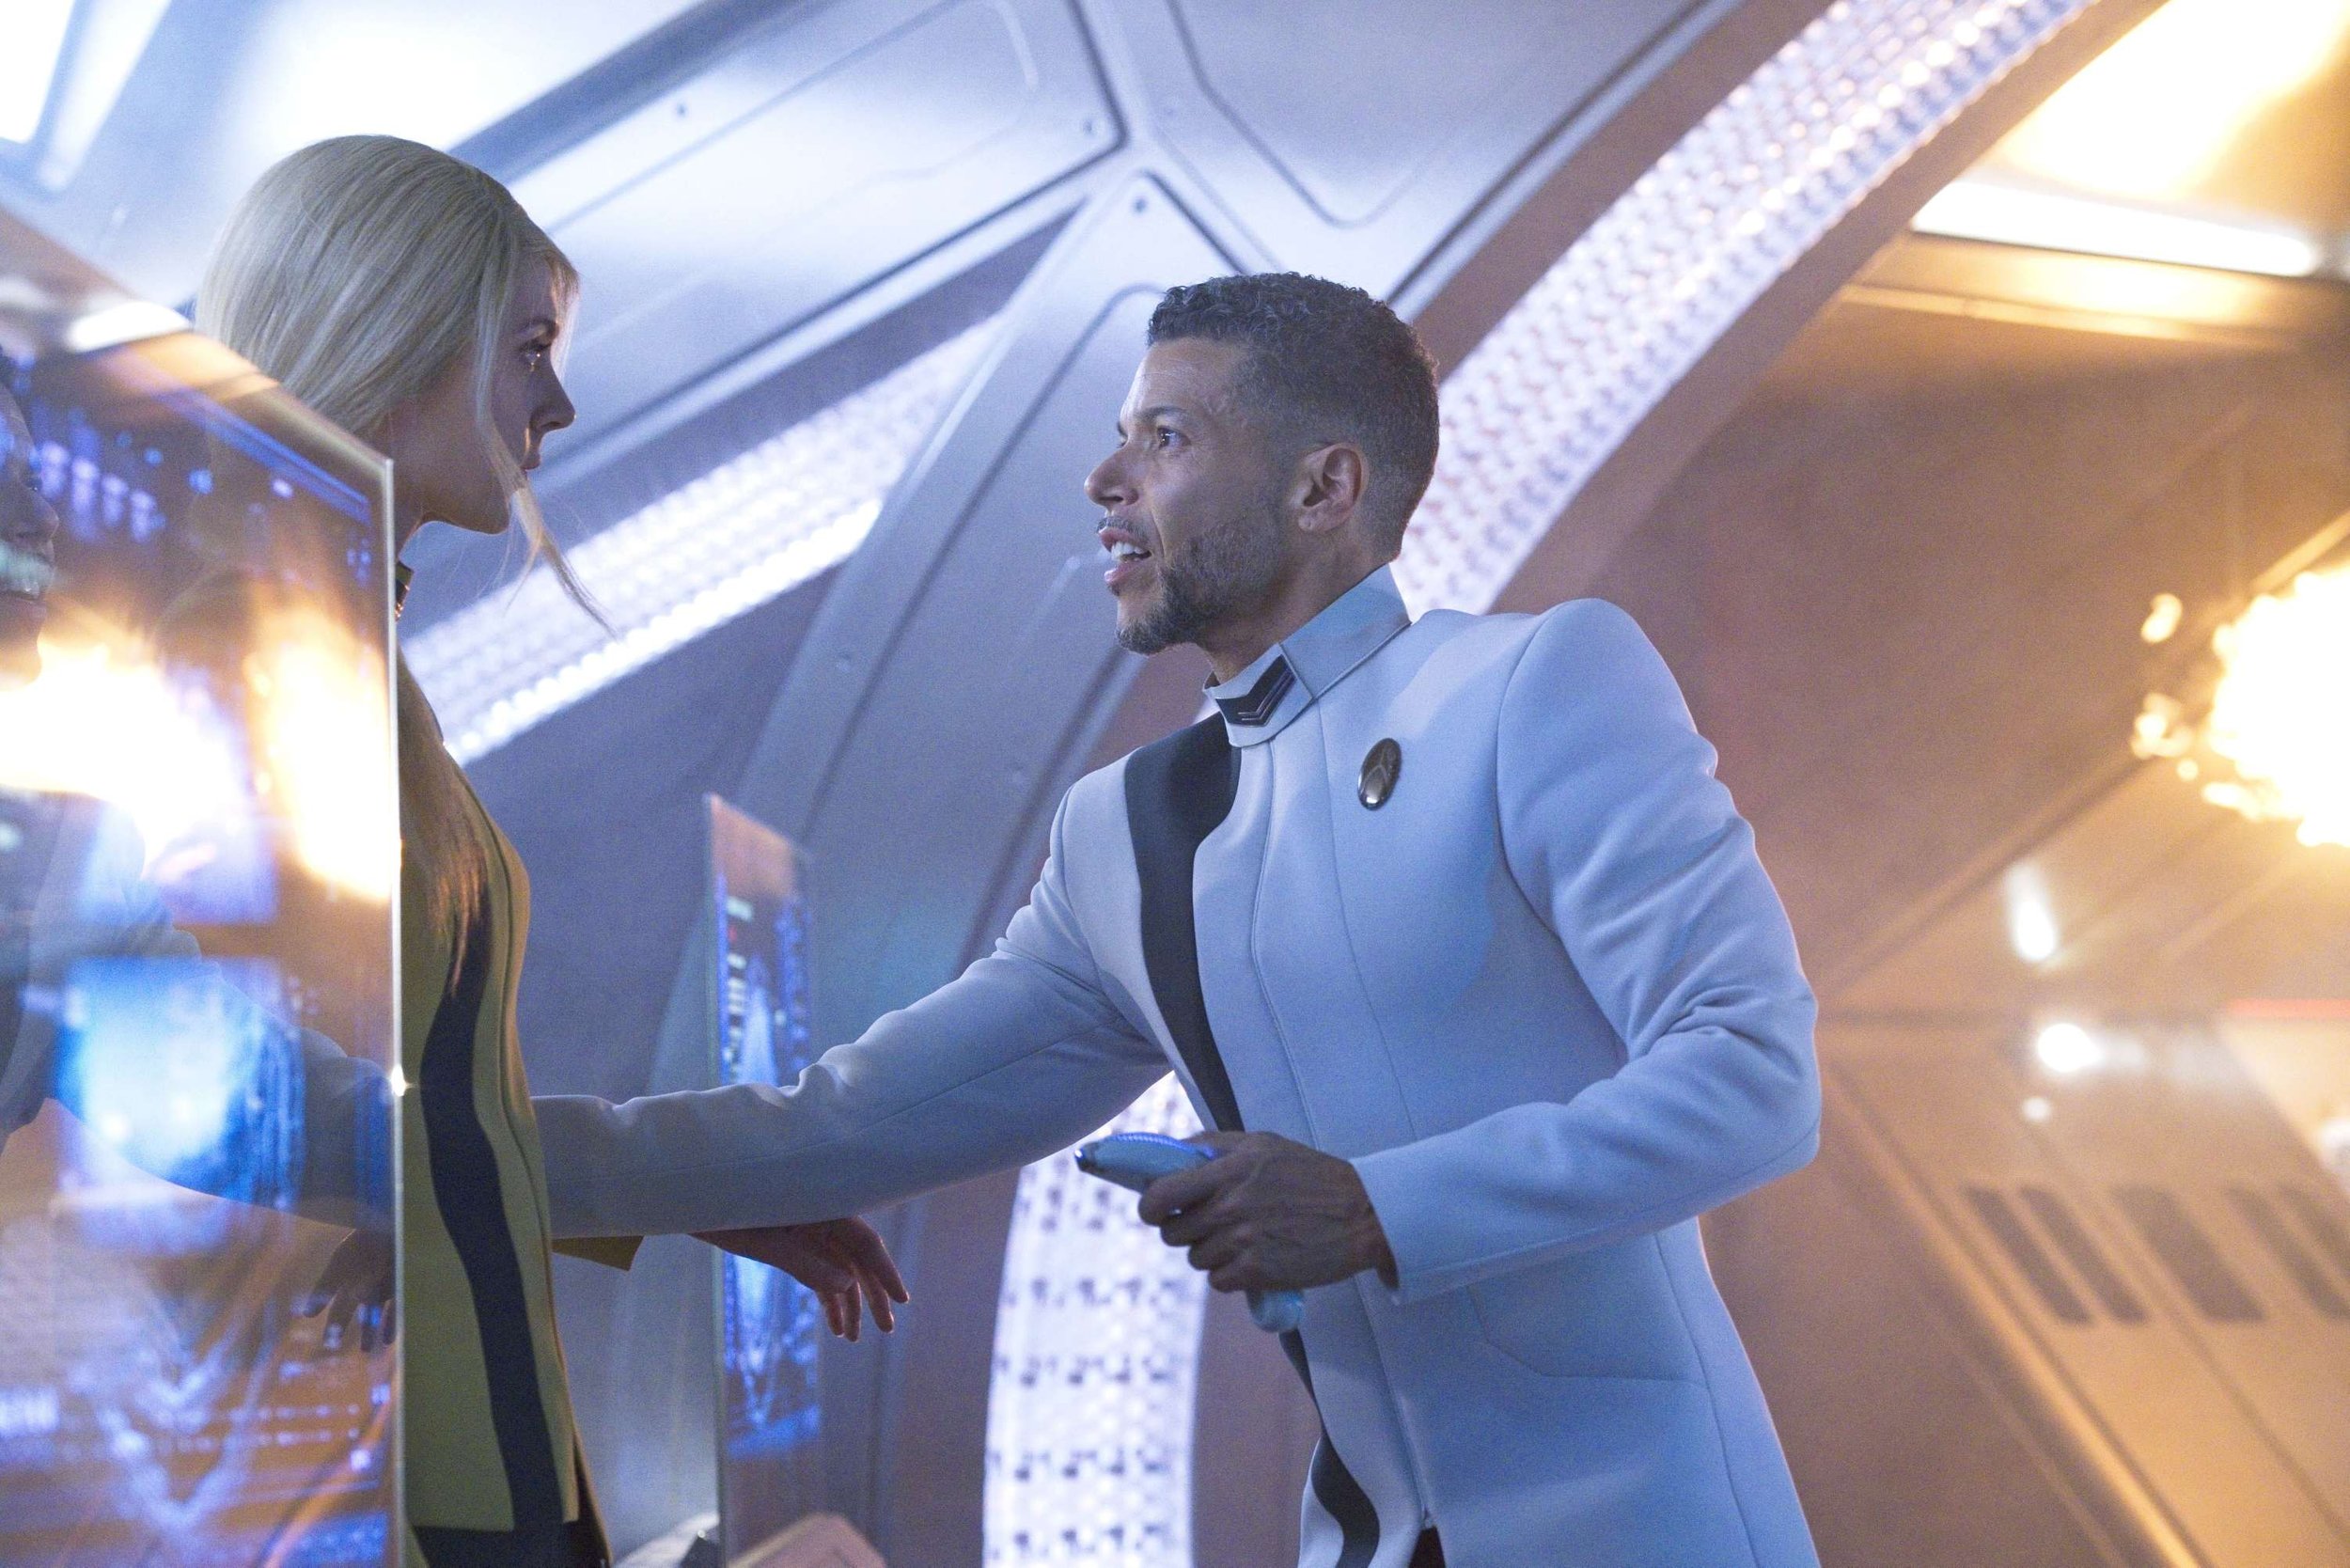   Pictured: Sara Mitich as Lt. Nilsson and Wilson Cruz as Culber of the Paramount+ original series STAR TREK: DISCOVERY. Photo Cr: Michael Gibson/ViacomCBS © 2021 ViacomCBS. All Rights Reserved.  